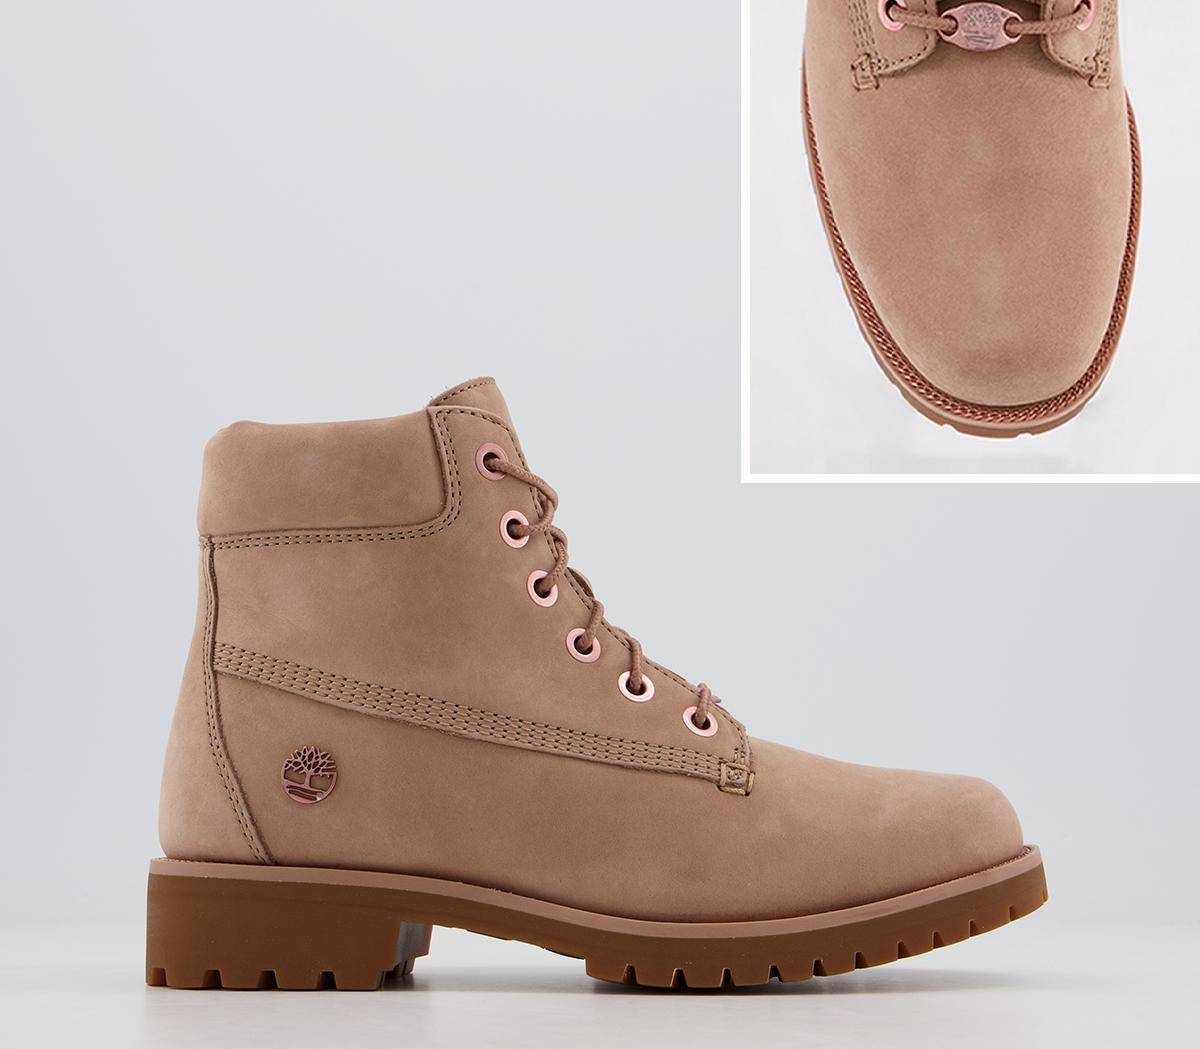 Timberland Slim Premium Inch Boots Tawny Rose Gold Chain - Women's Ankle Boots